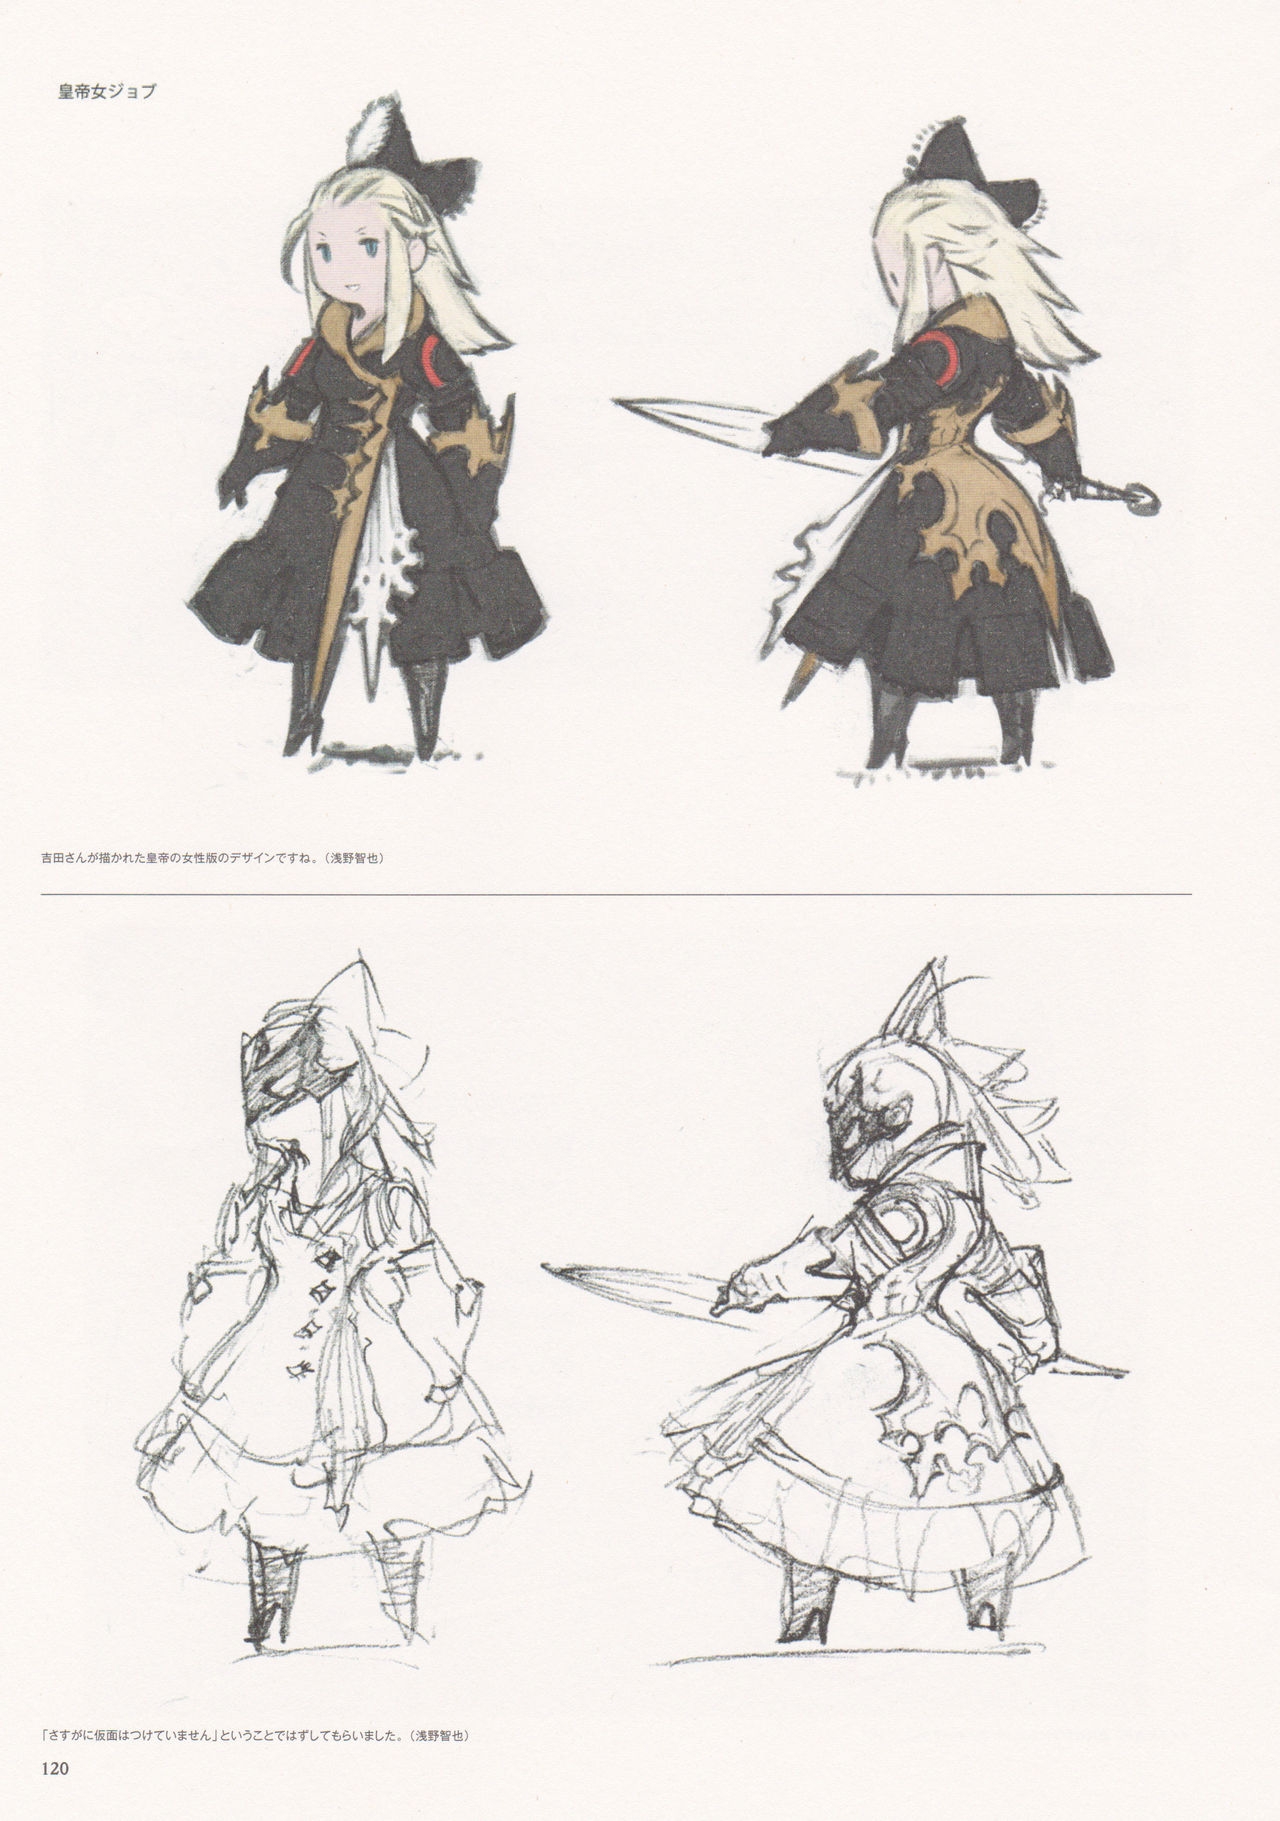 Bravely Second - End Layer - Design Works THE ART OF BRAVELY 2013-2015 120